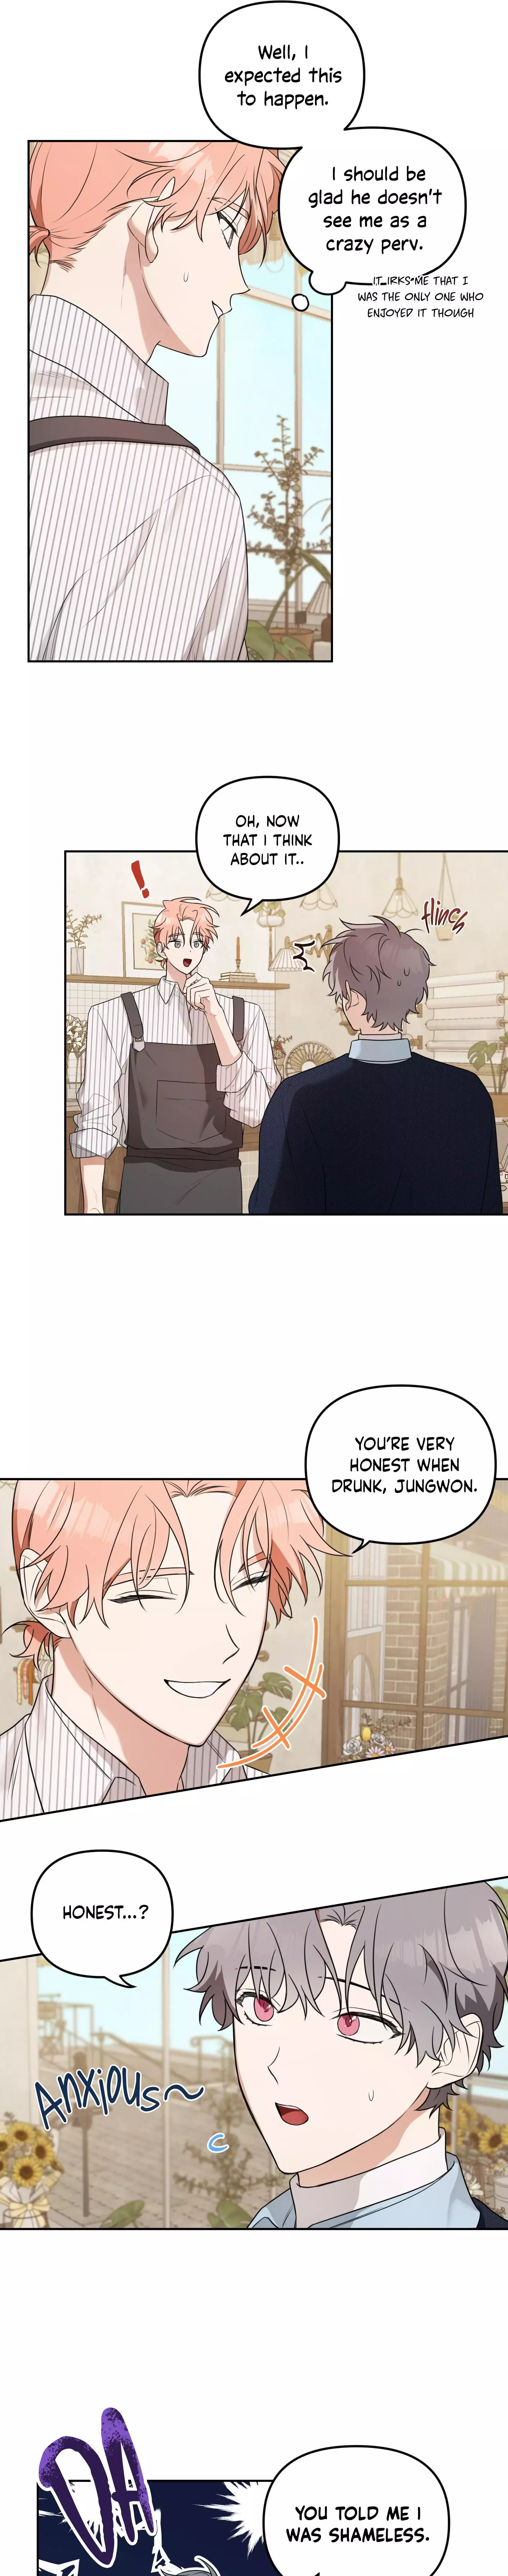 Jungwon’S Flowers - 6 page 12-02600eb4